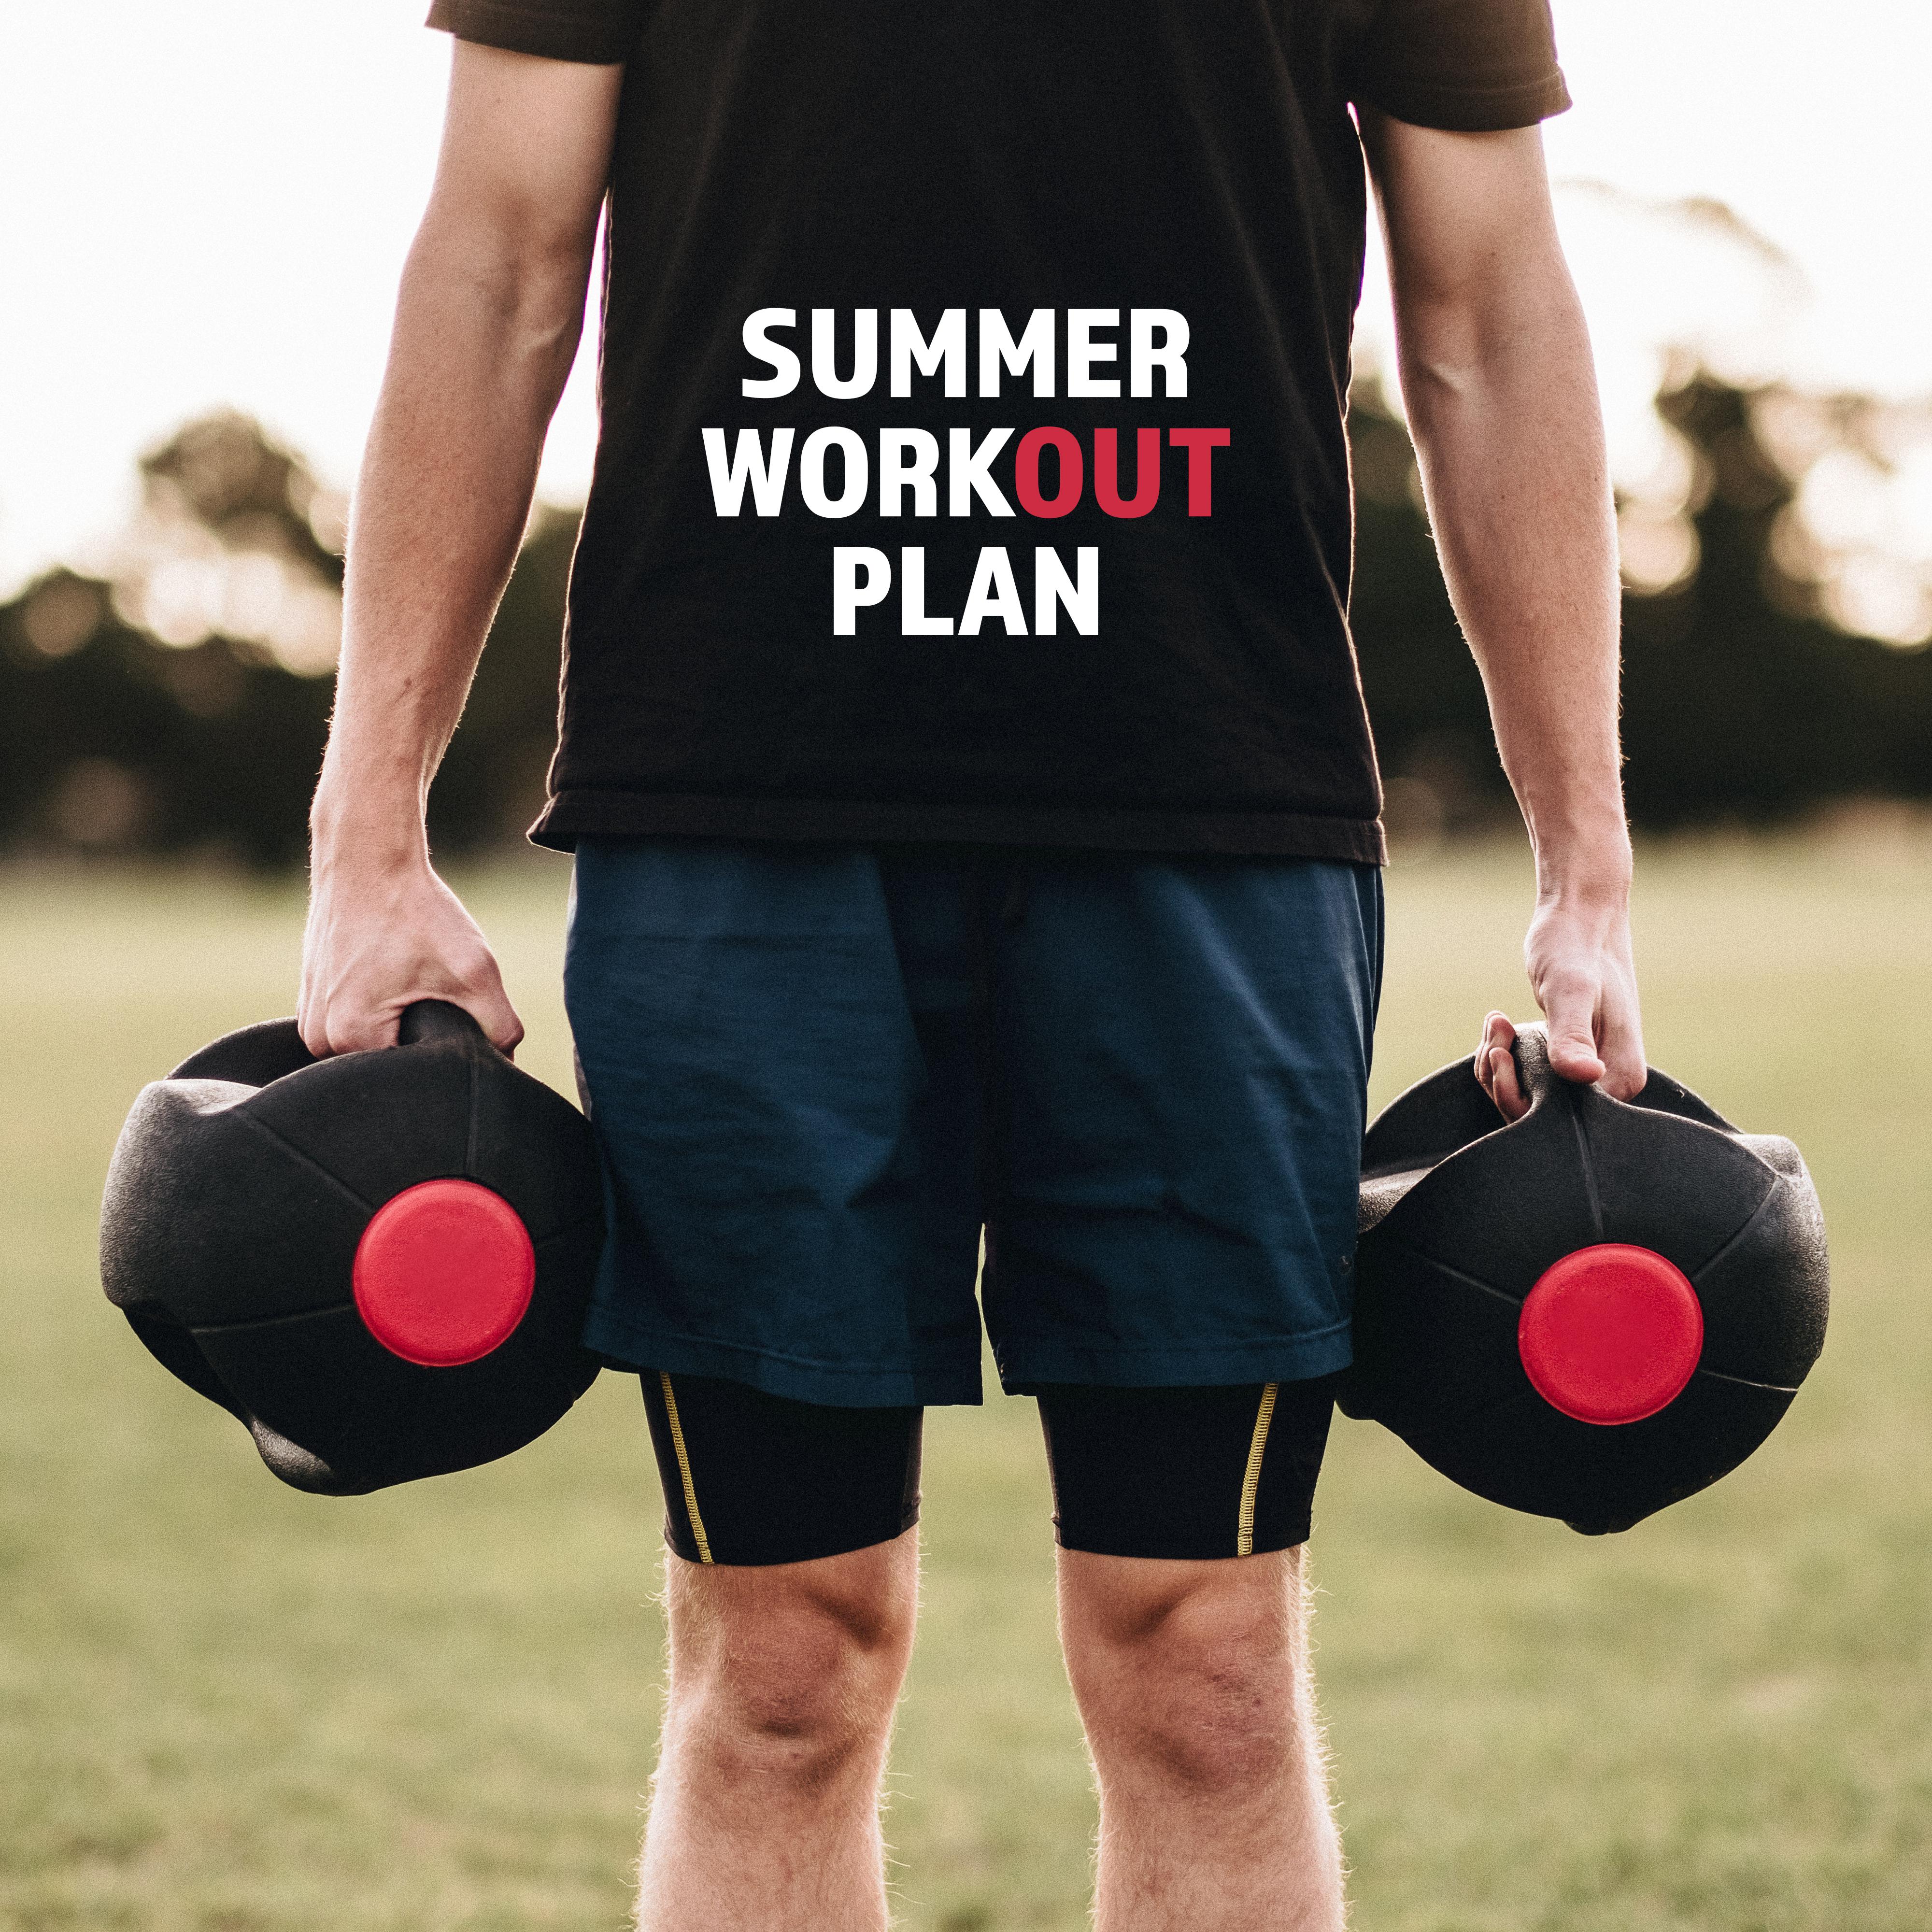 Summer Workout Plan - Music for Exercises and Training, to Lose Superfluous Kilograms, Lose Weight and Achieve Your Dream Figure for the Summer